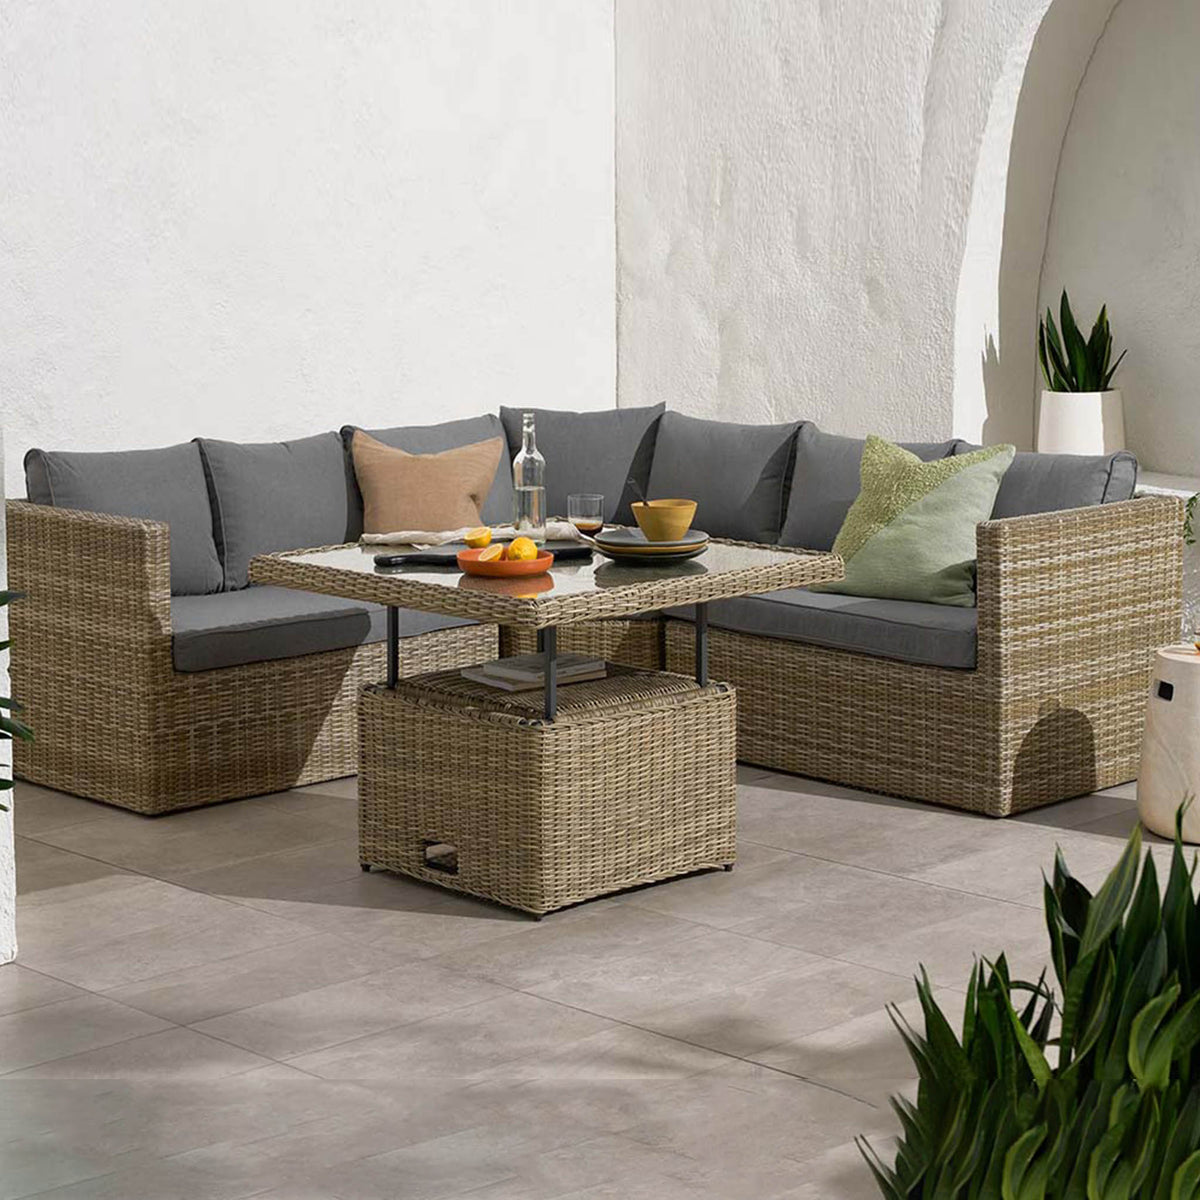 Wentworth Rattan Garden Lounge Dining Set with Adjustable Table